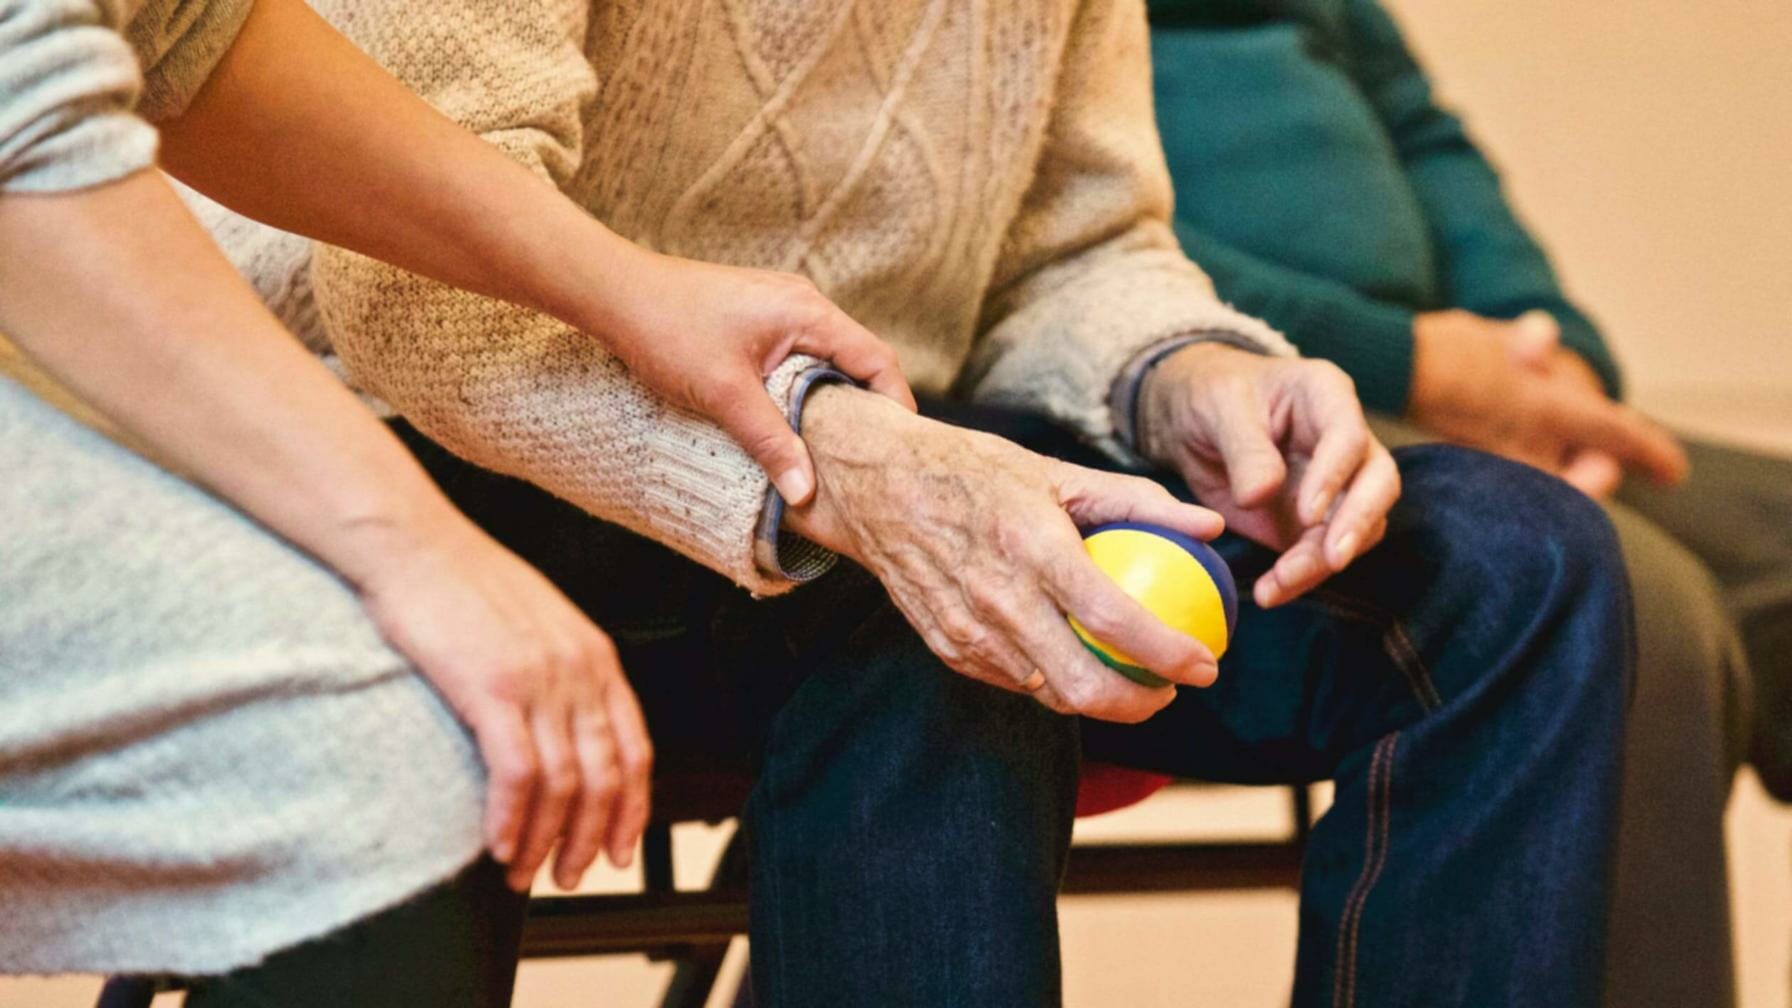 Elderly patient holding a stress ball in being comforted